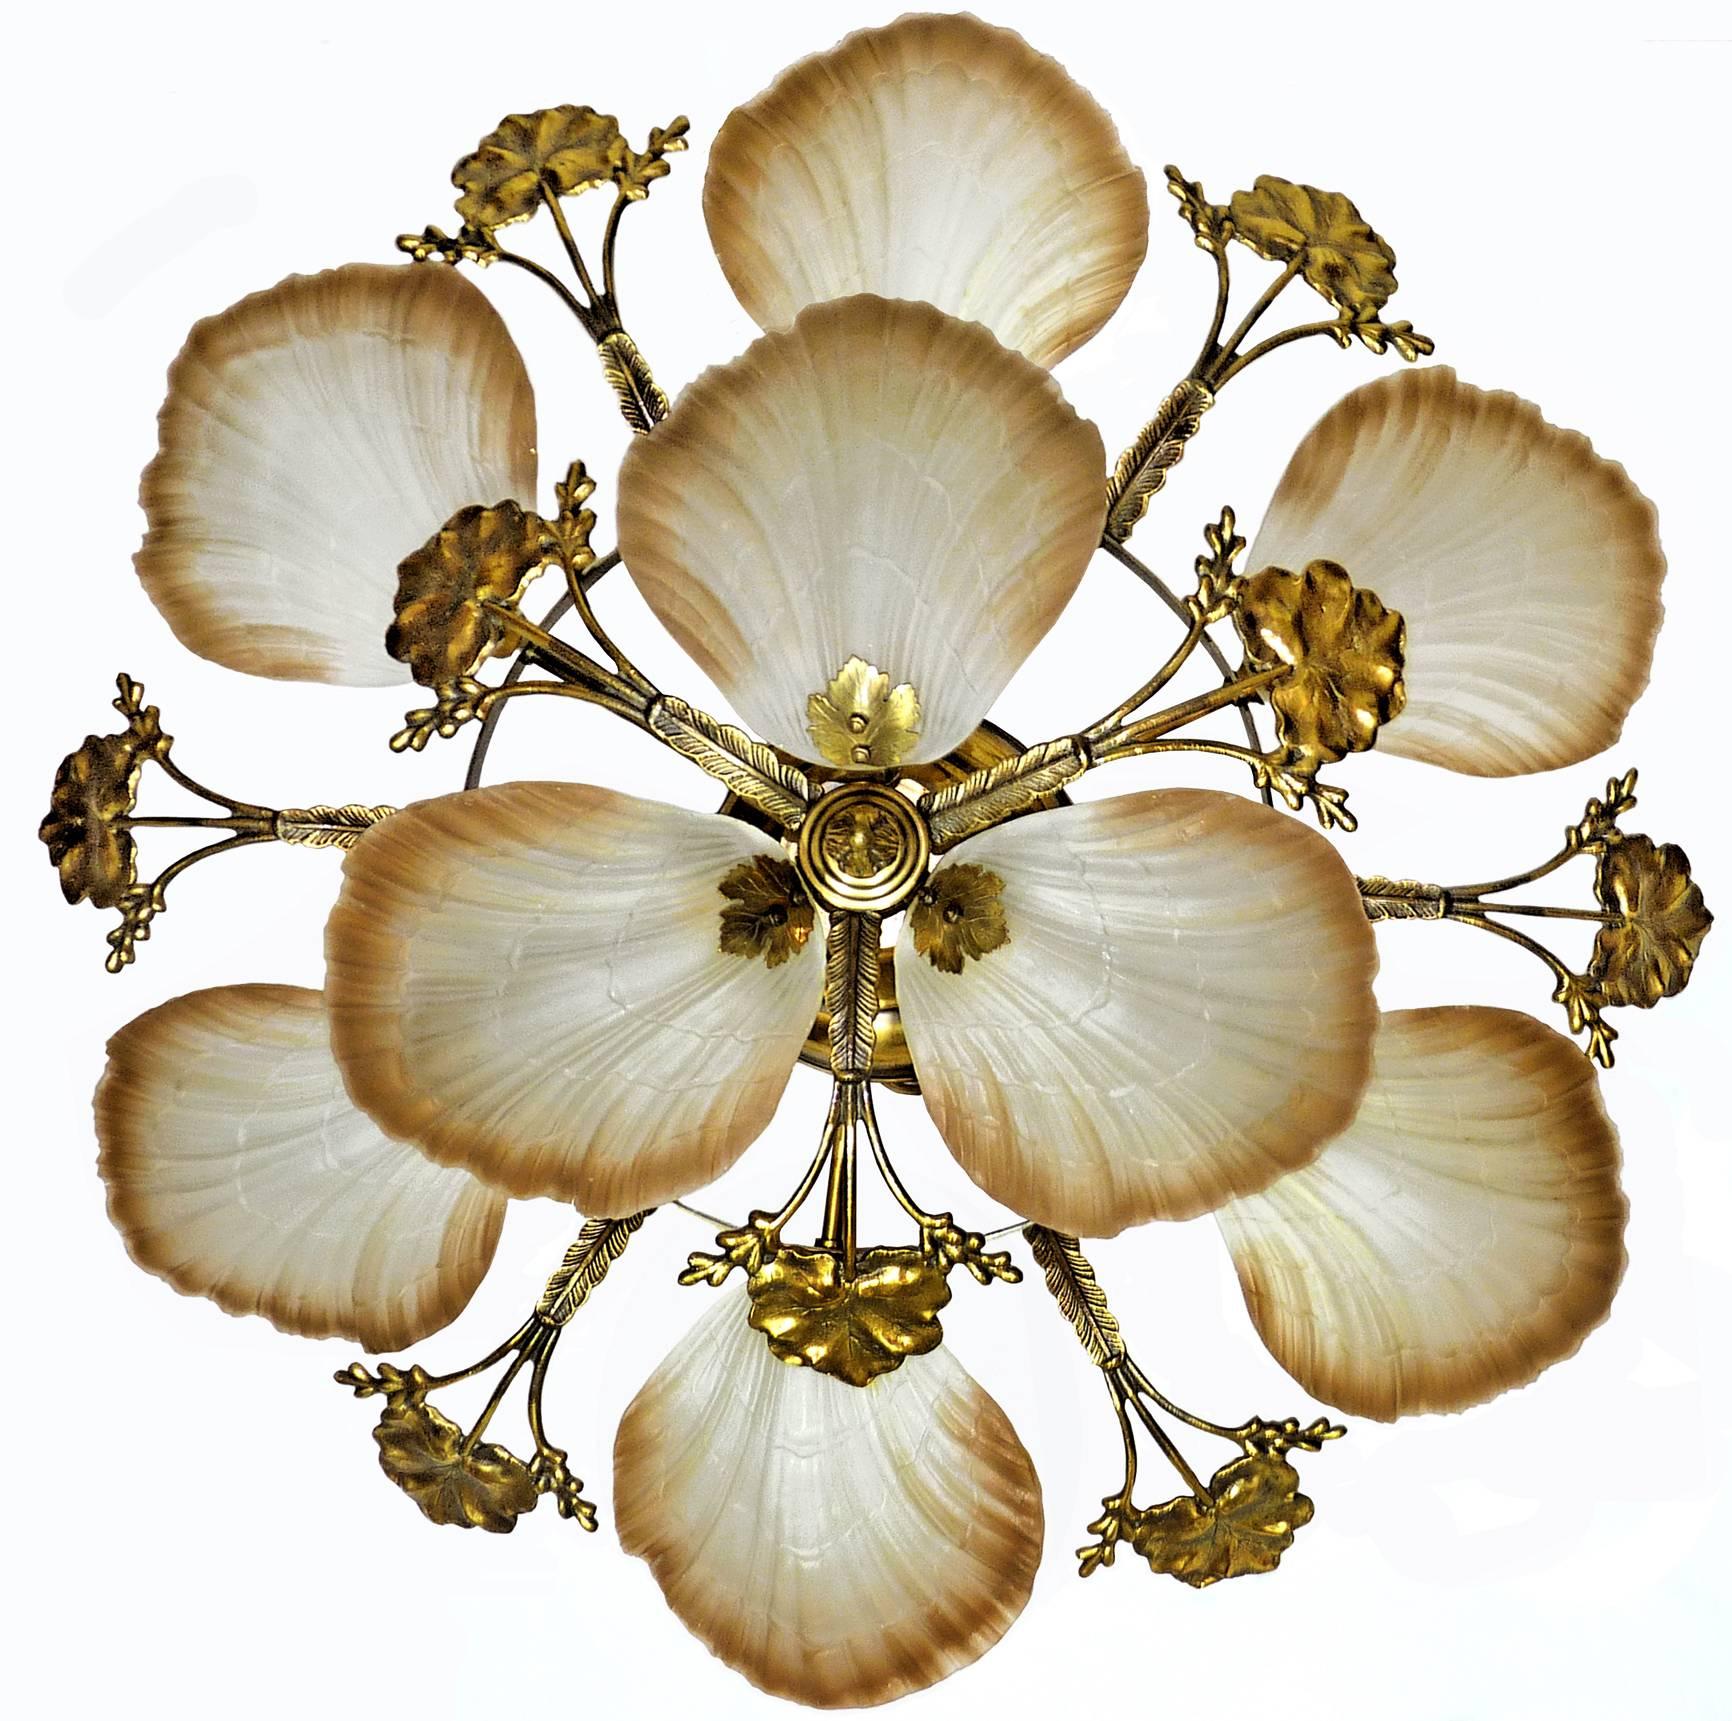 Art Nouveau style chandelier or flush mount with petal or shell shaped frosted glass and leaf design brass
Measures: 
Diameter 80 cm
Height 30 cm
Weight 12 Kg / 24 lb
Nine-light bulbs E14 Good working condition/European wiring.
Your item will